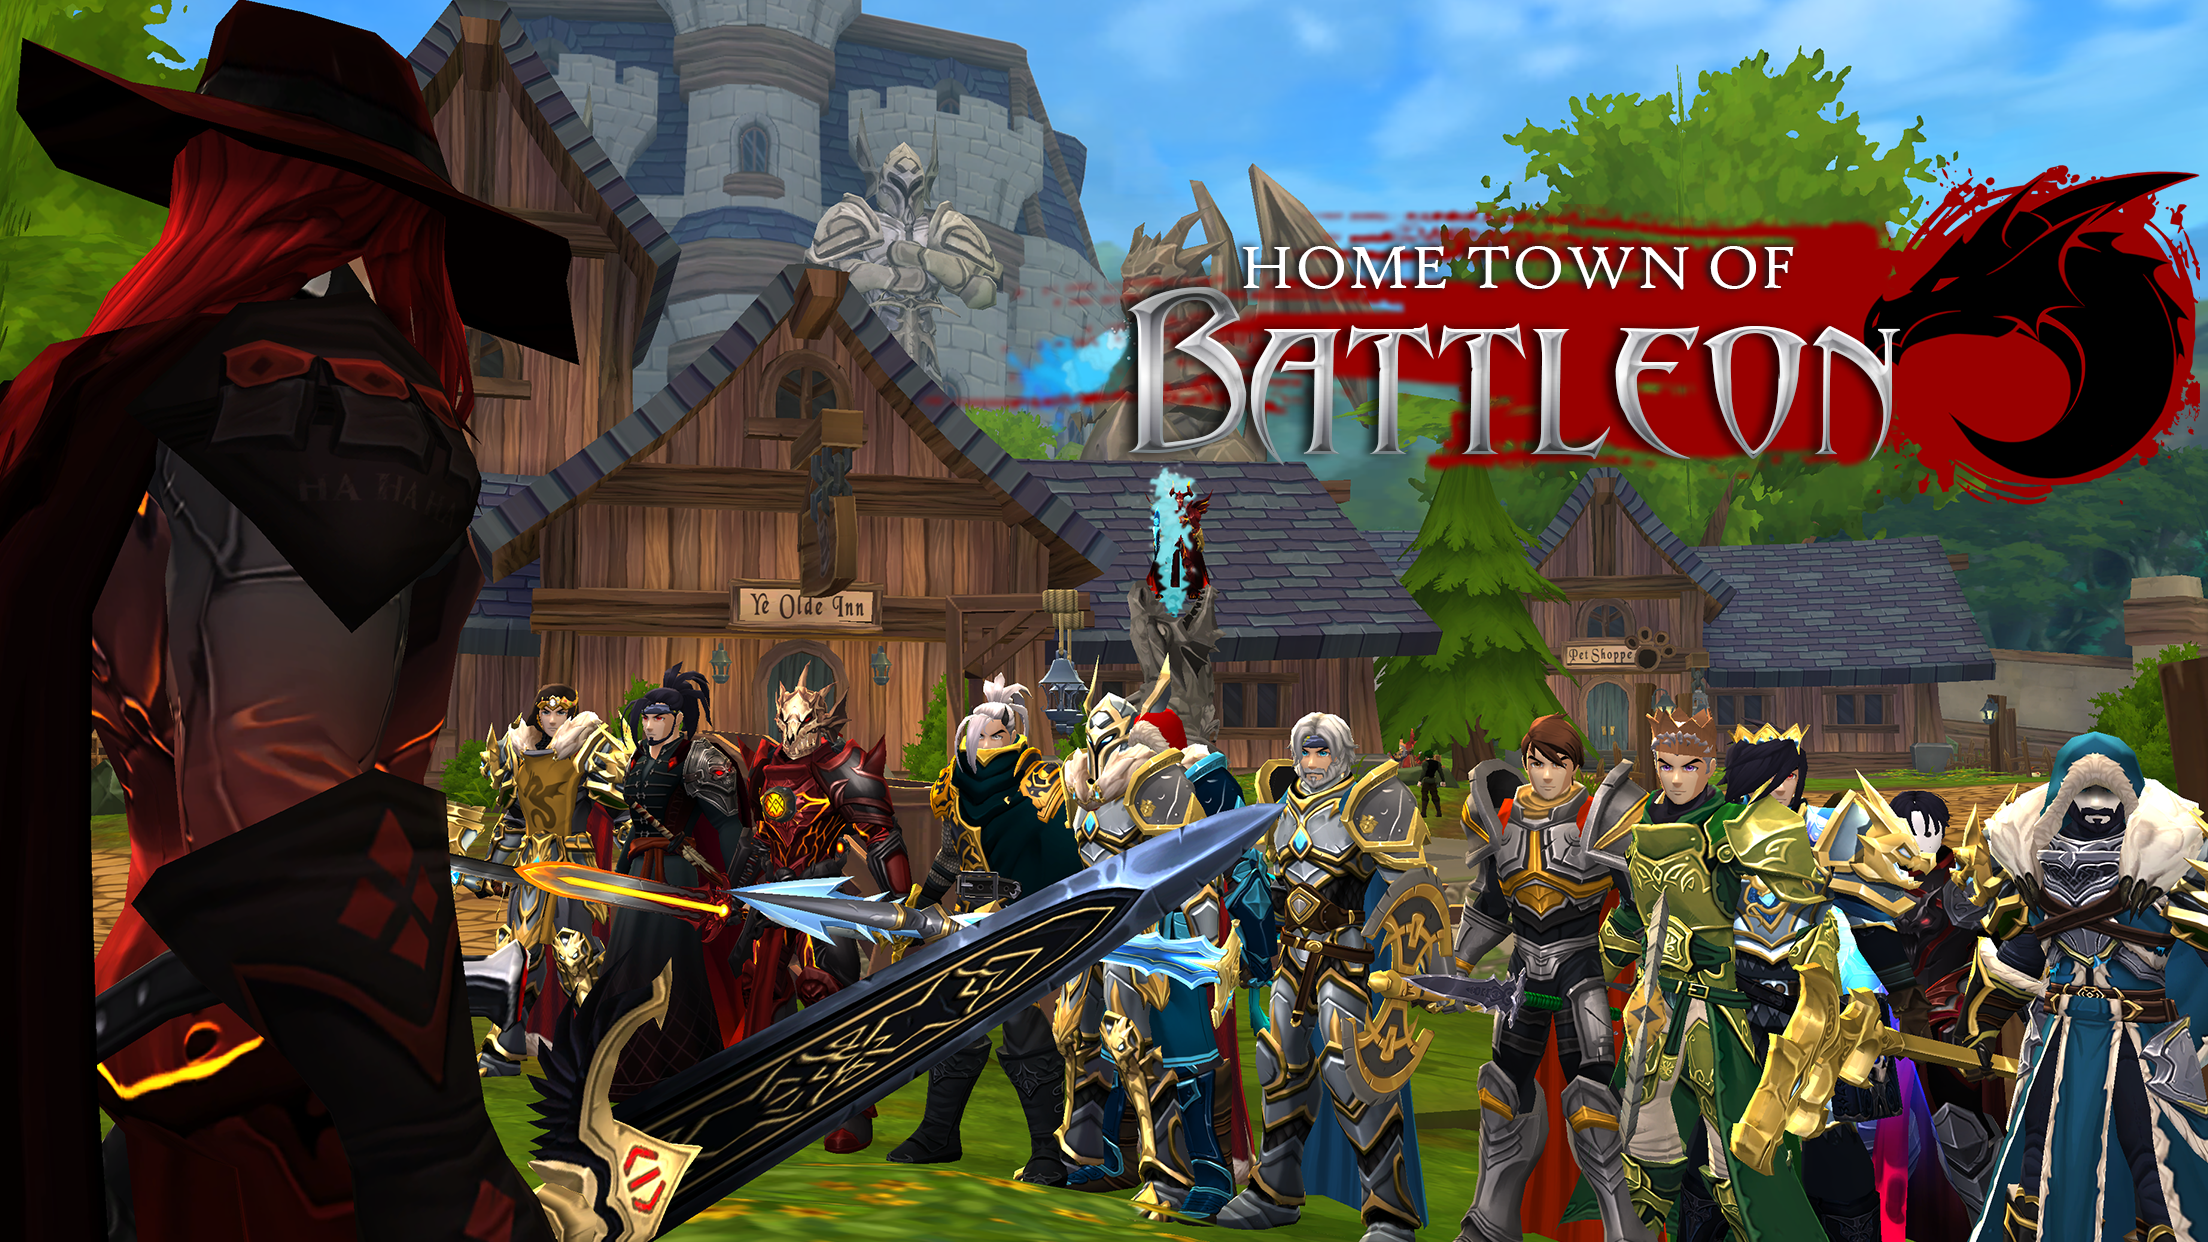 About: Adventure Quest 3D MMO RPG (iOS App Store version)